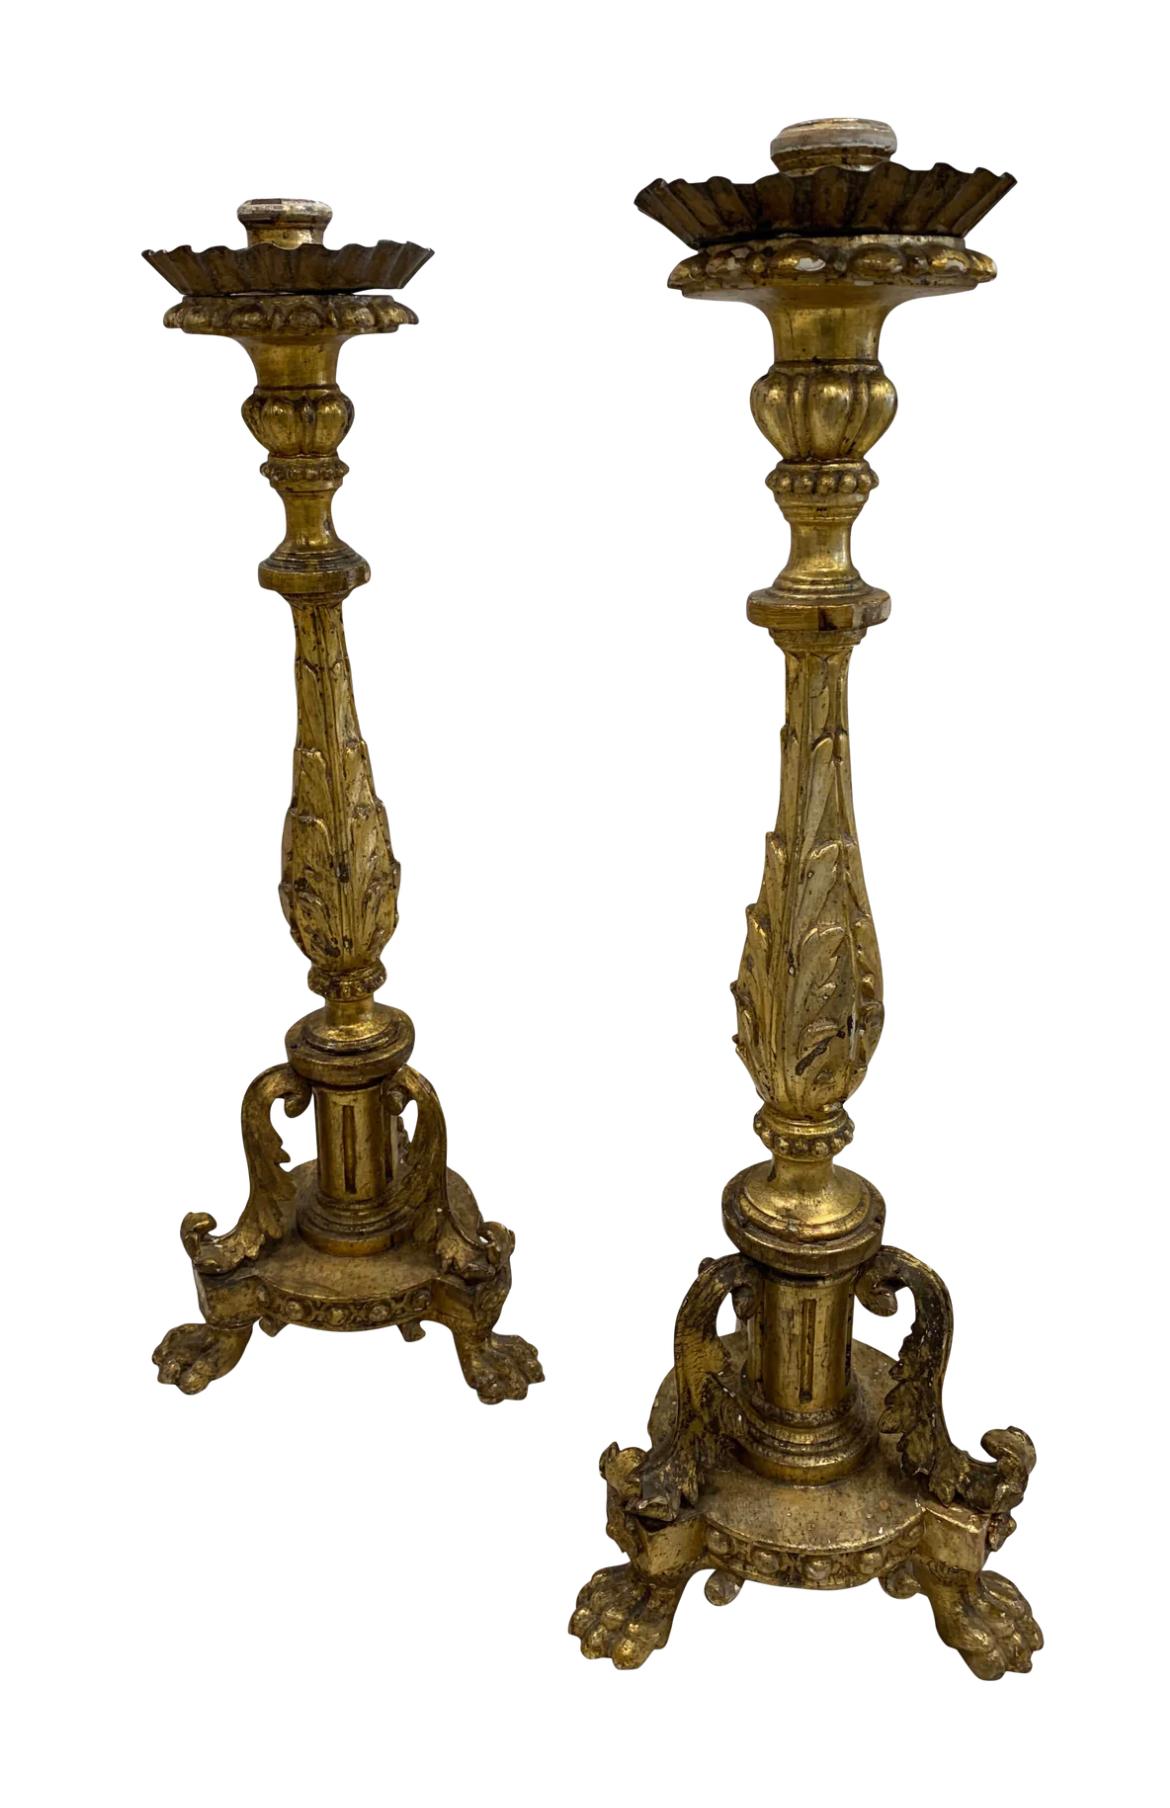 What a gorgeous pair of Italian gold gilt candlesticks with original bobeches! These are stunning and are such a unique shape that sit upon 3 lion paws on each candlestick. They can go traditional or also wabi sabi. Place alone on a console or on a